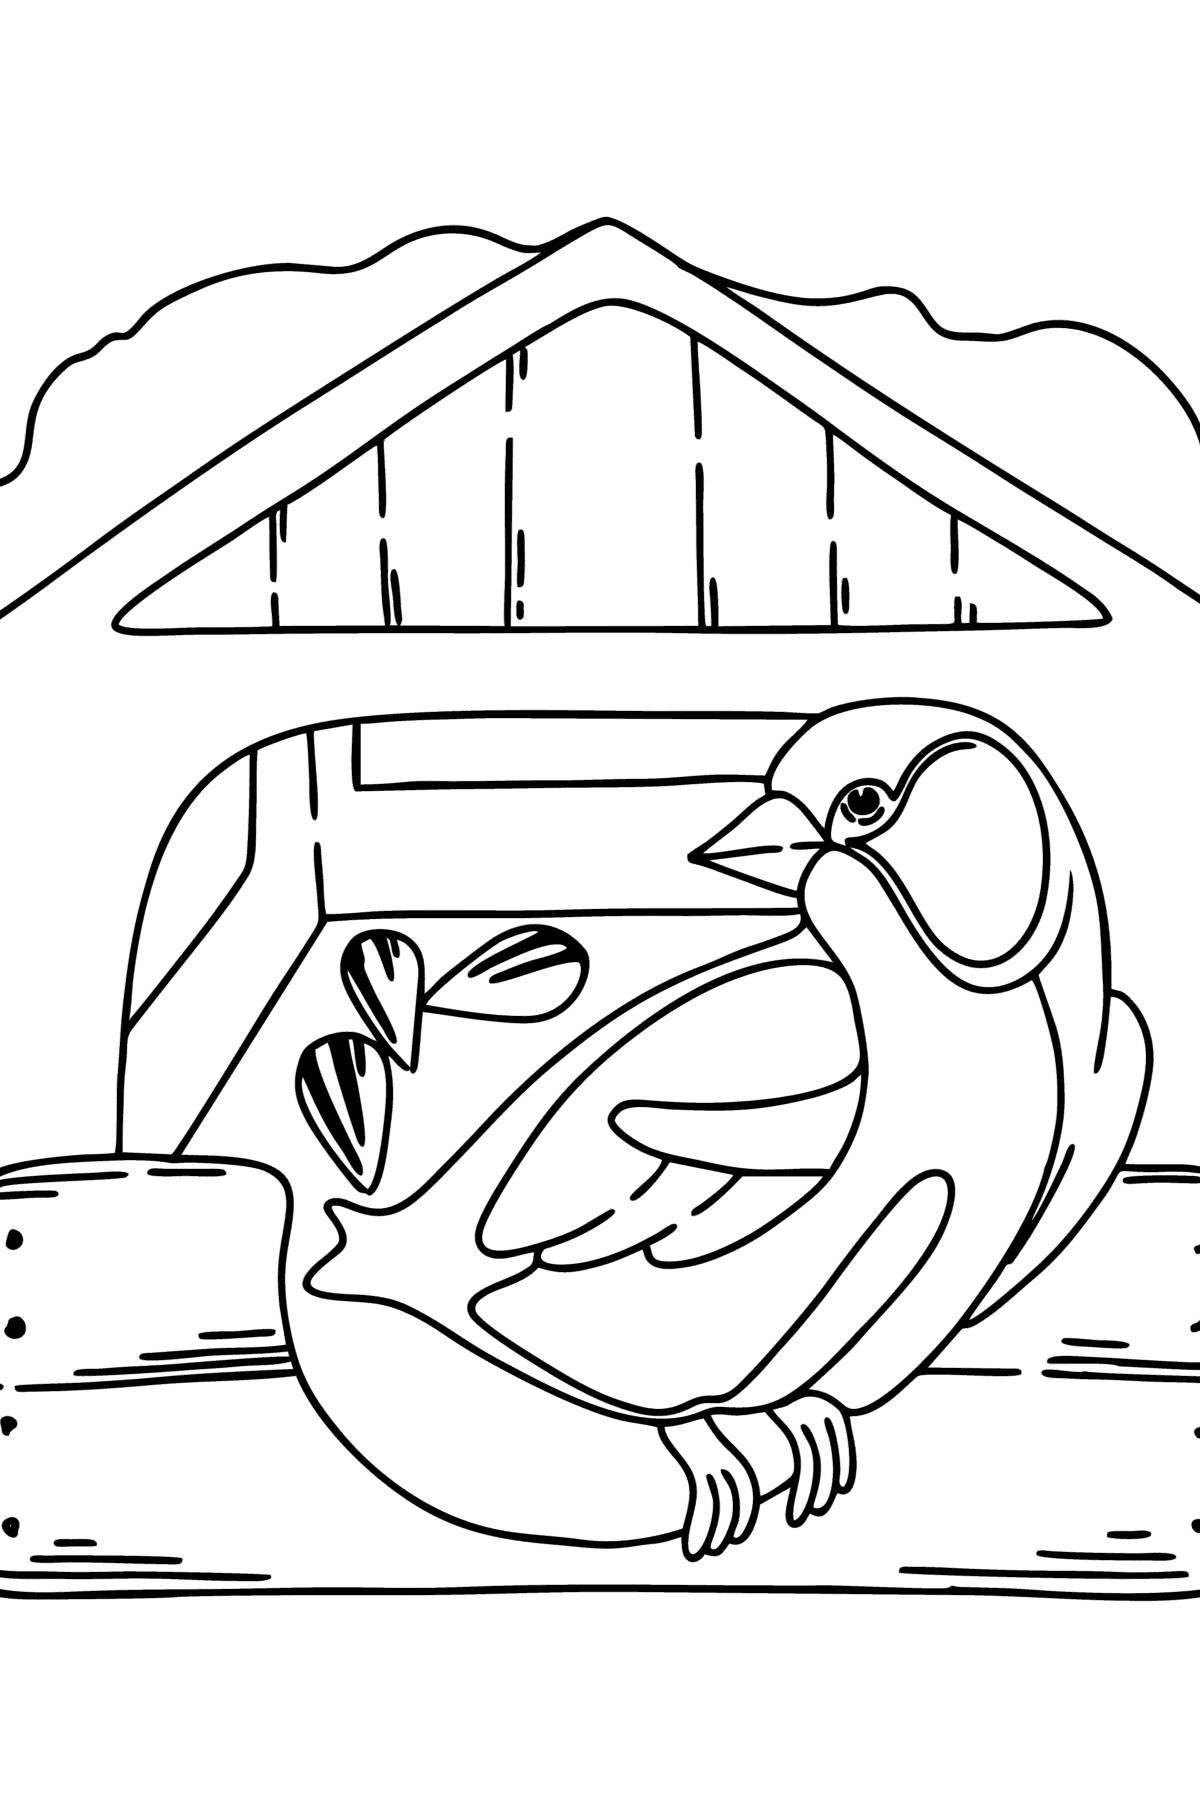 Colorful bird feeder coloring page for 3-4 year olds